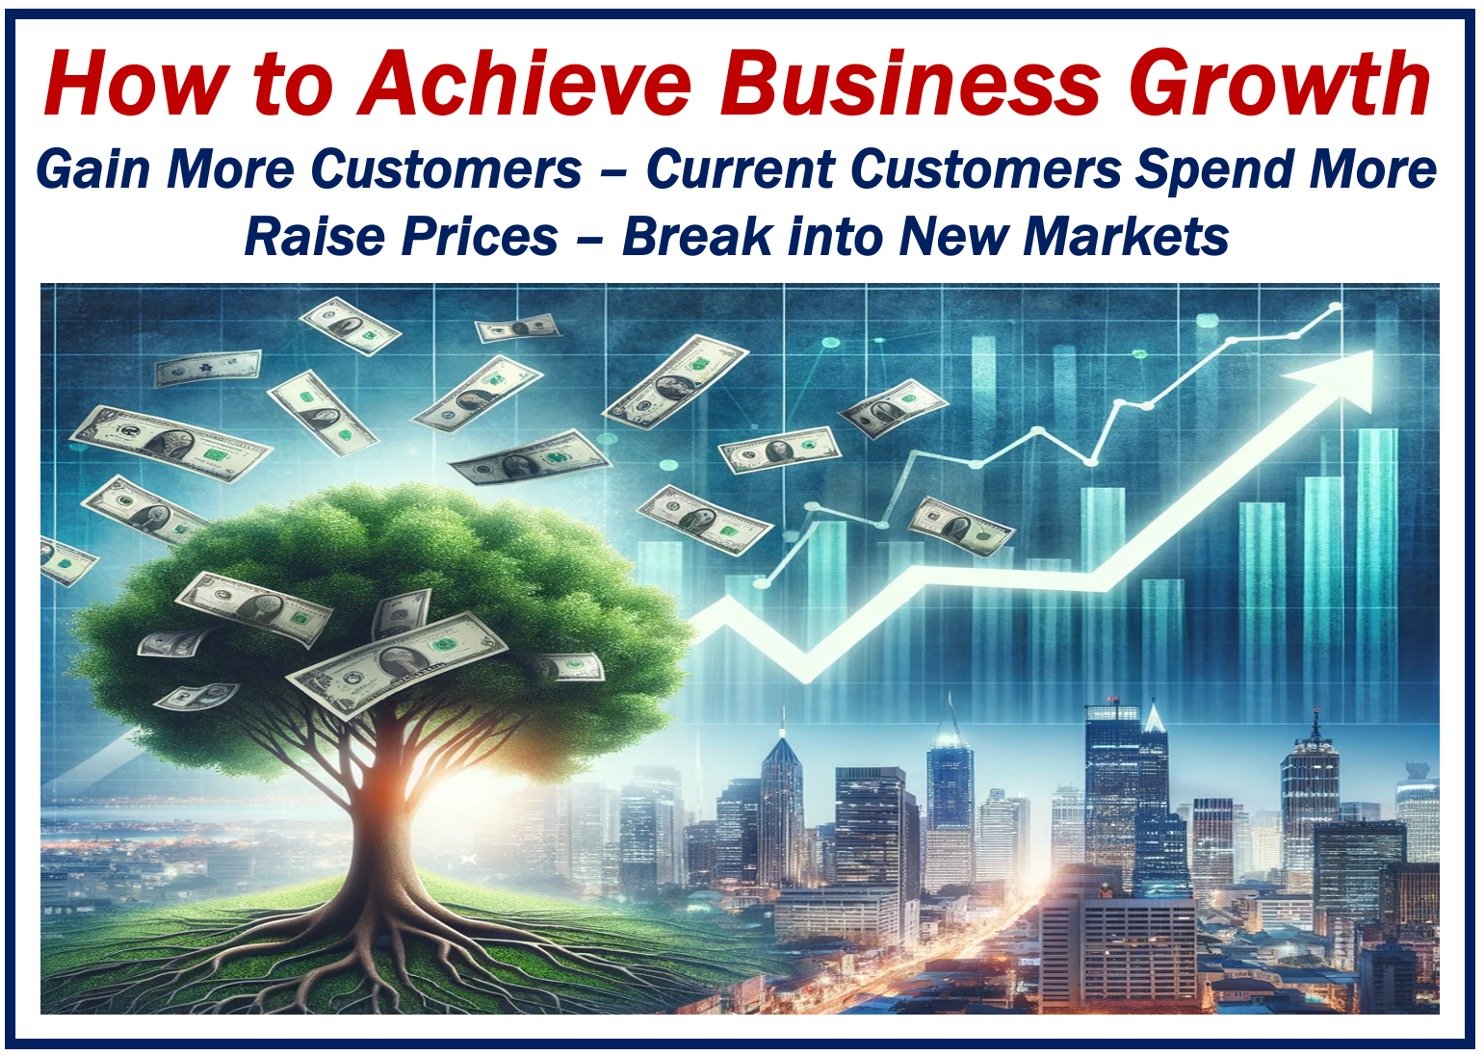 Image depicting concept of business growth and explaining how to achieve it.